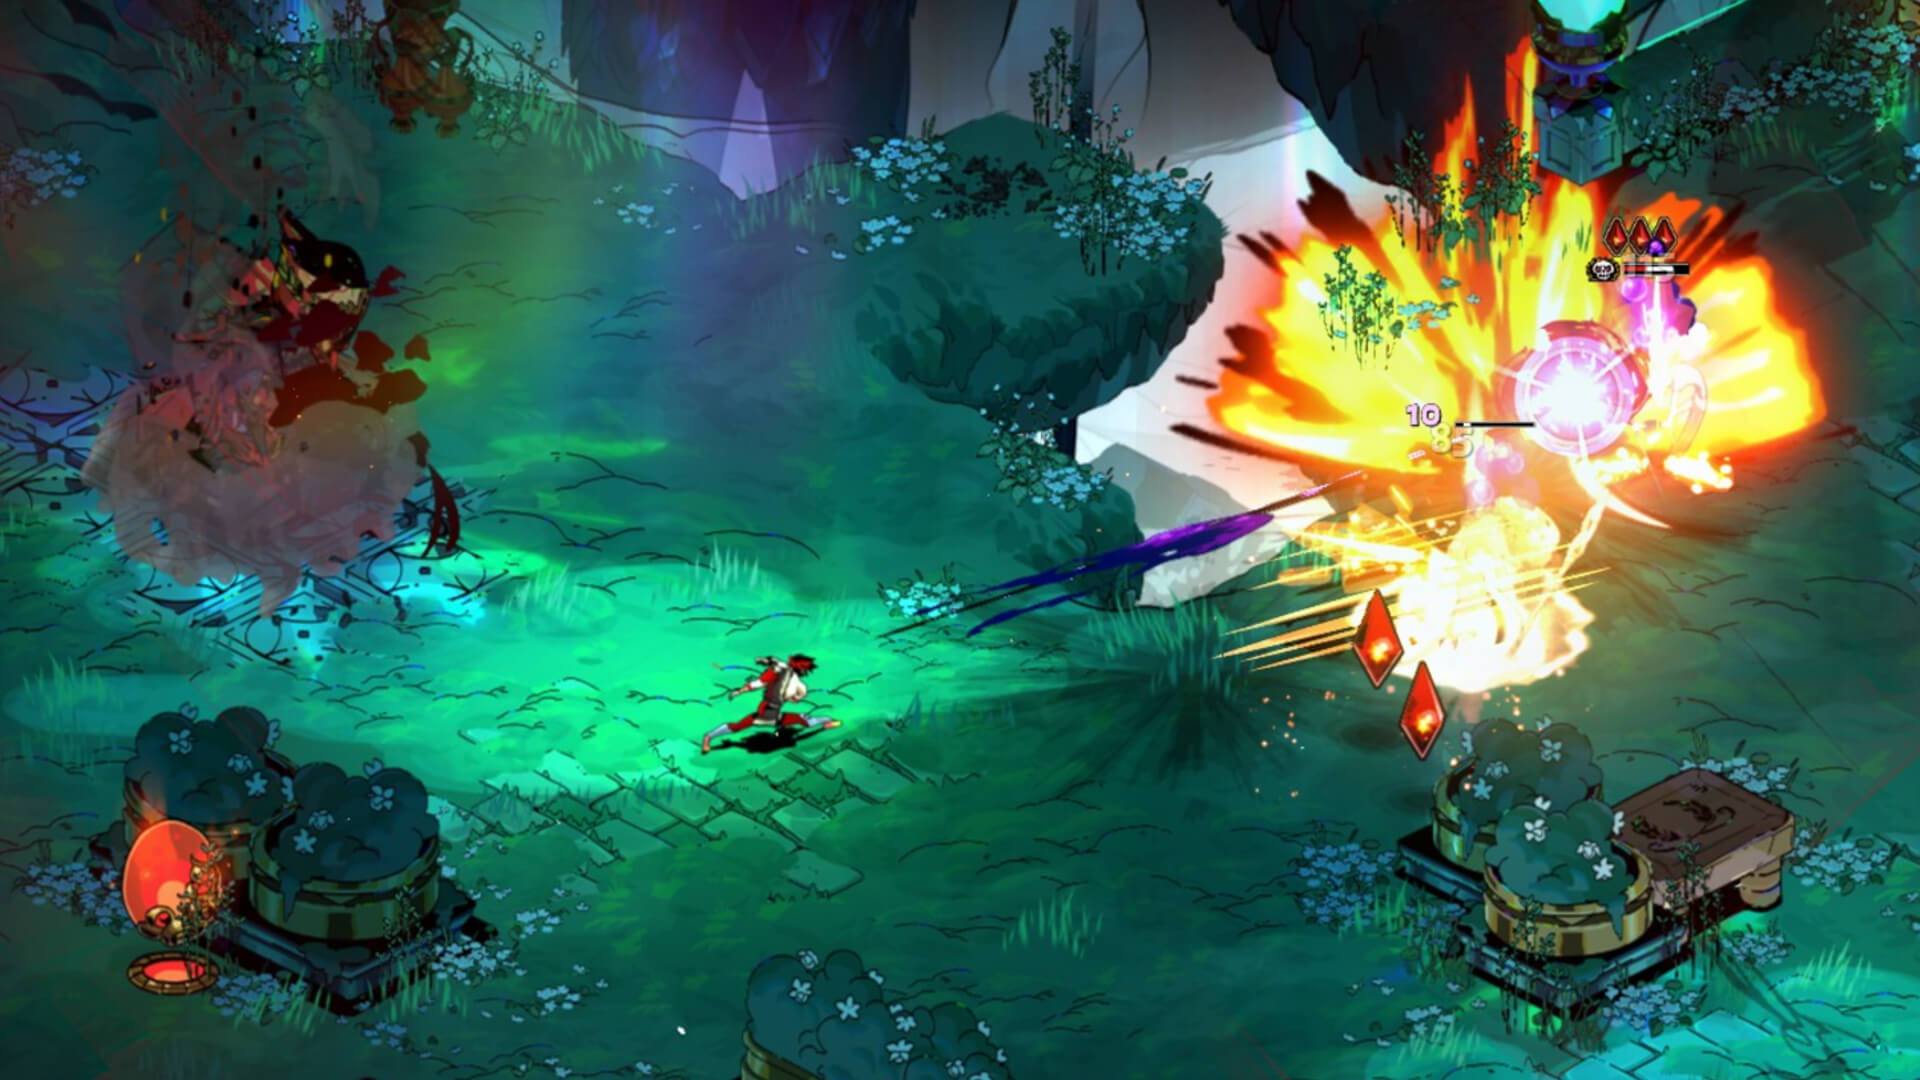 Hades 2 Release Date, Early Access Launch, Gameplay Features